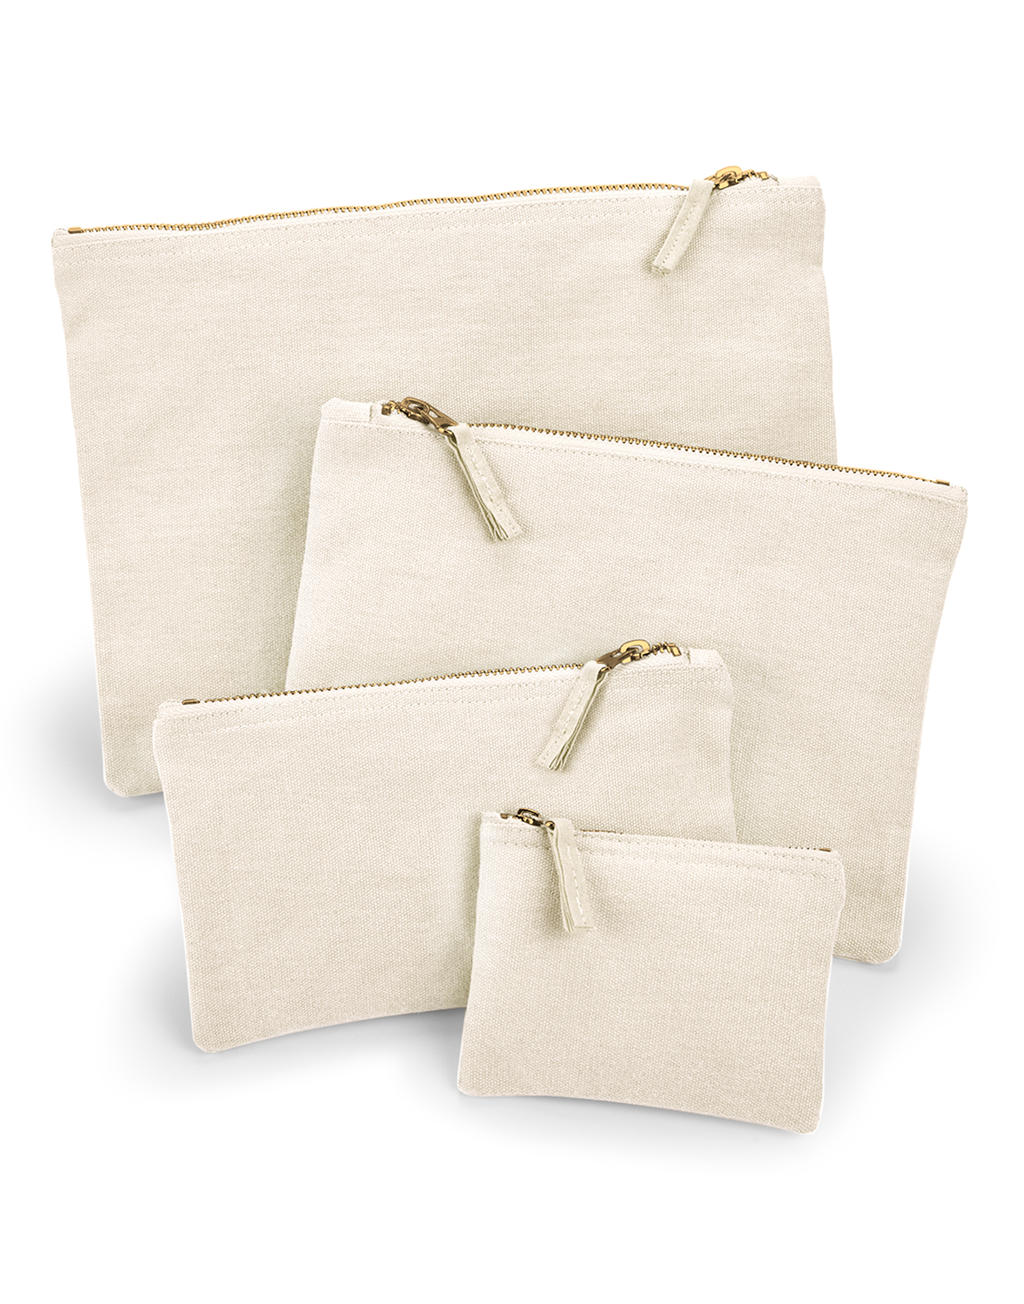  Canvas Accessory Pouch in Farbe Natural